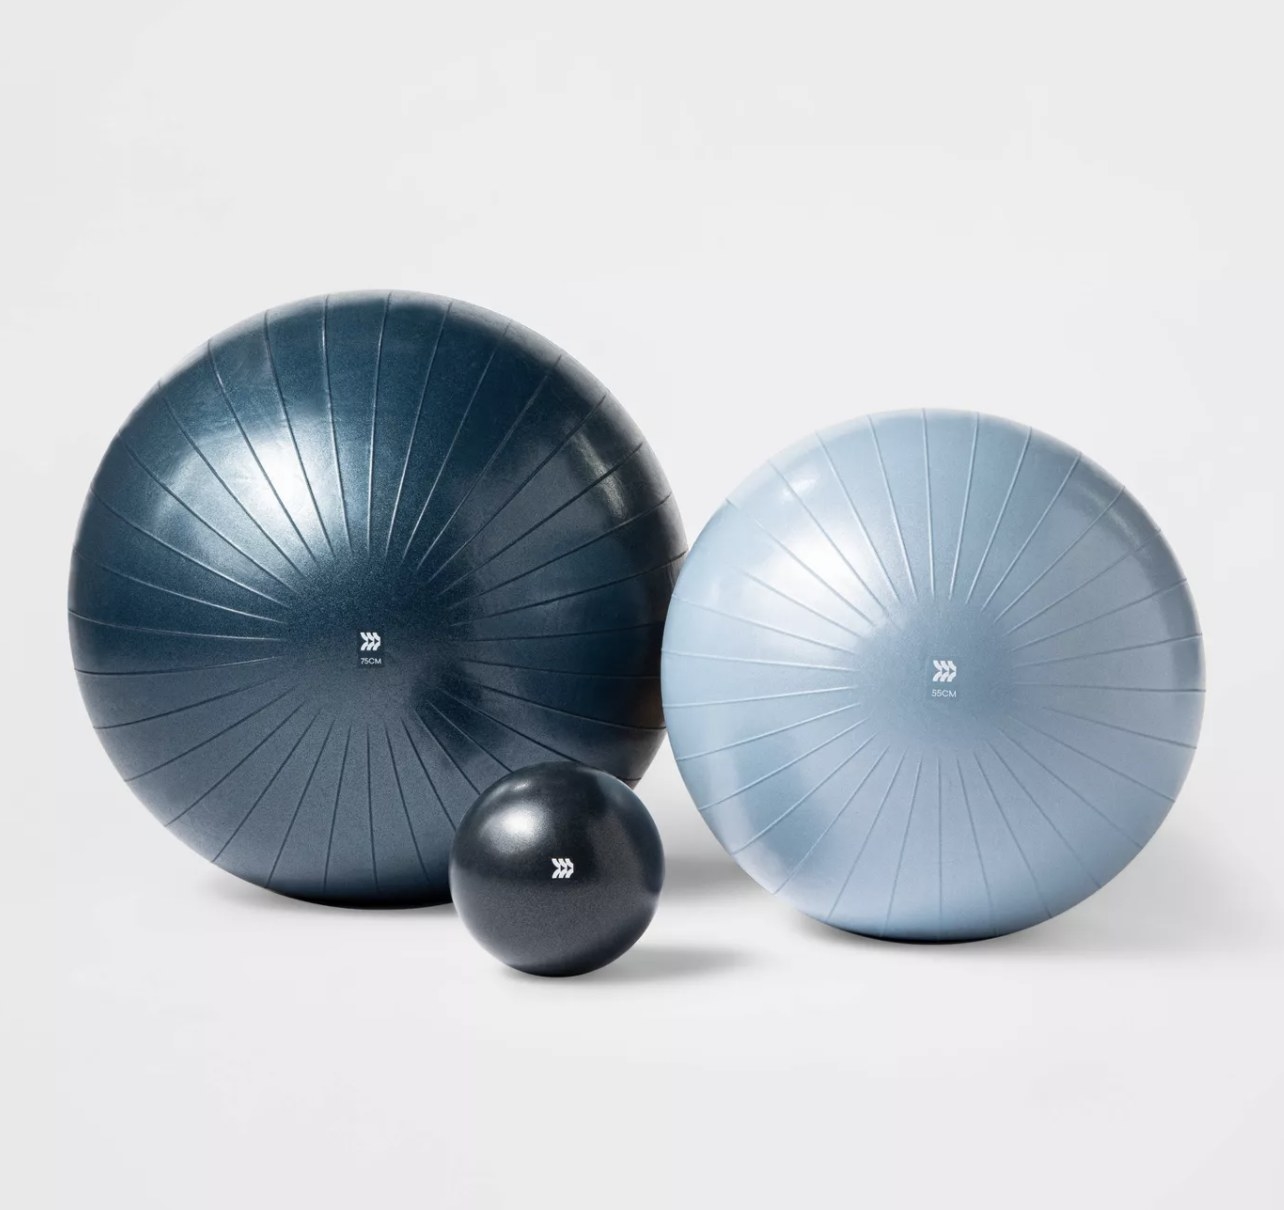 The stability balls in various sizes